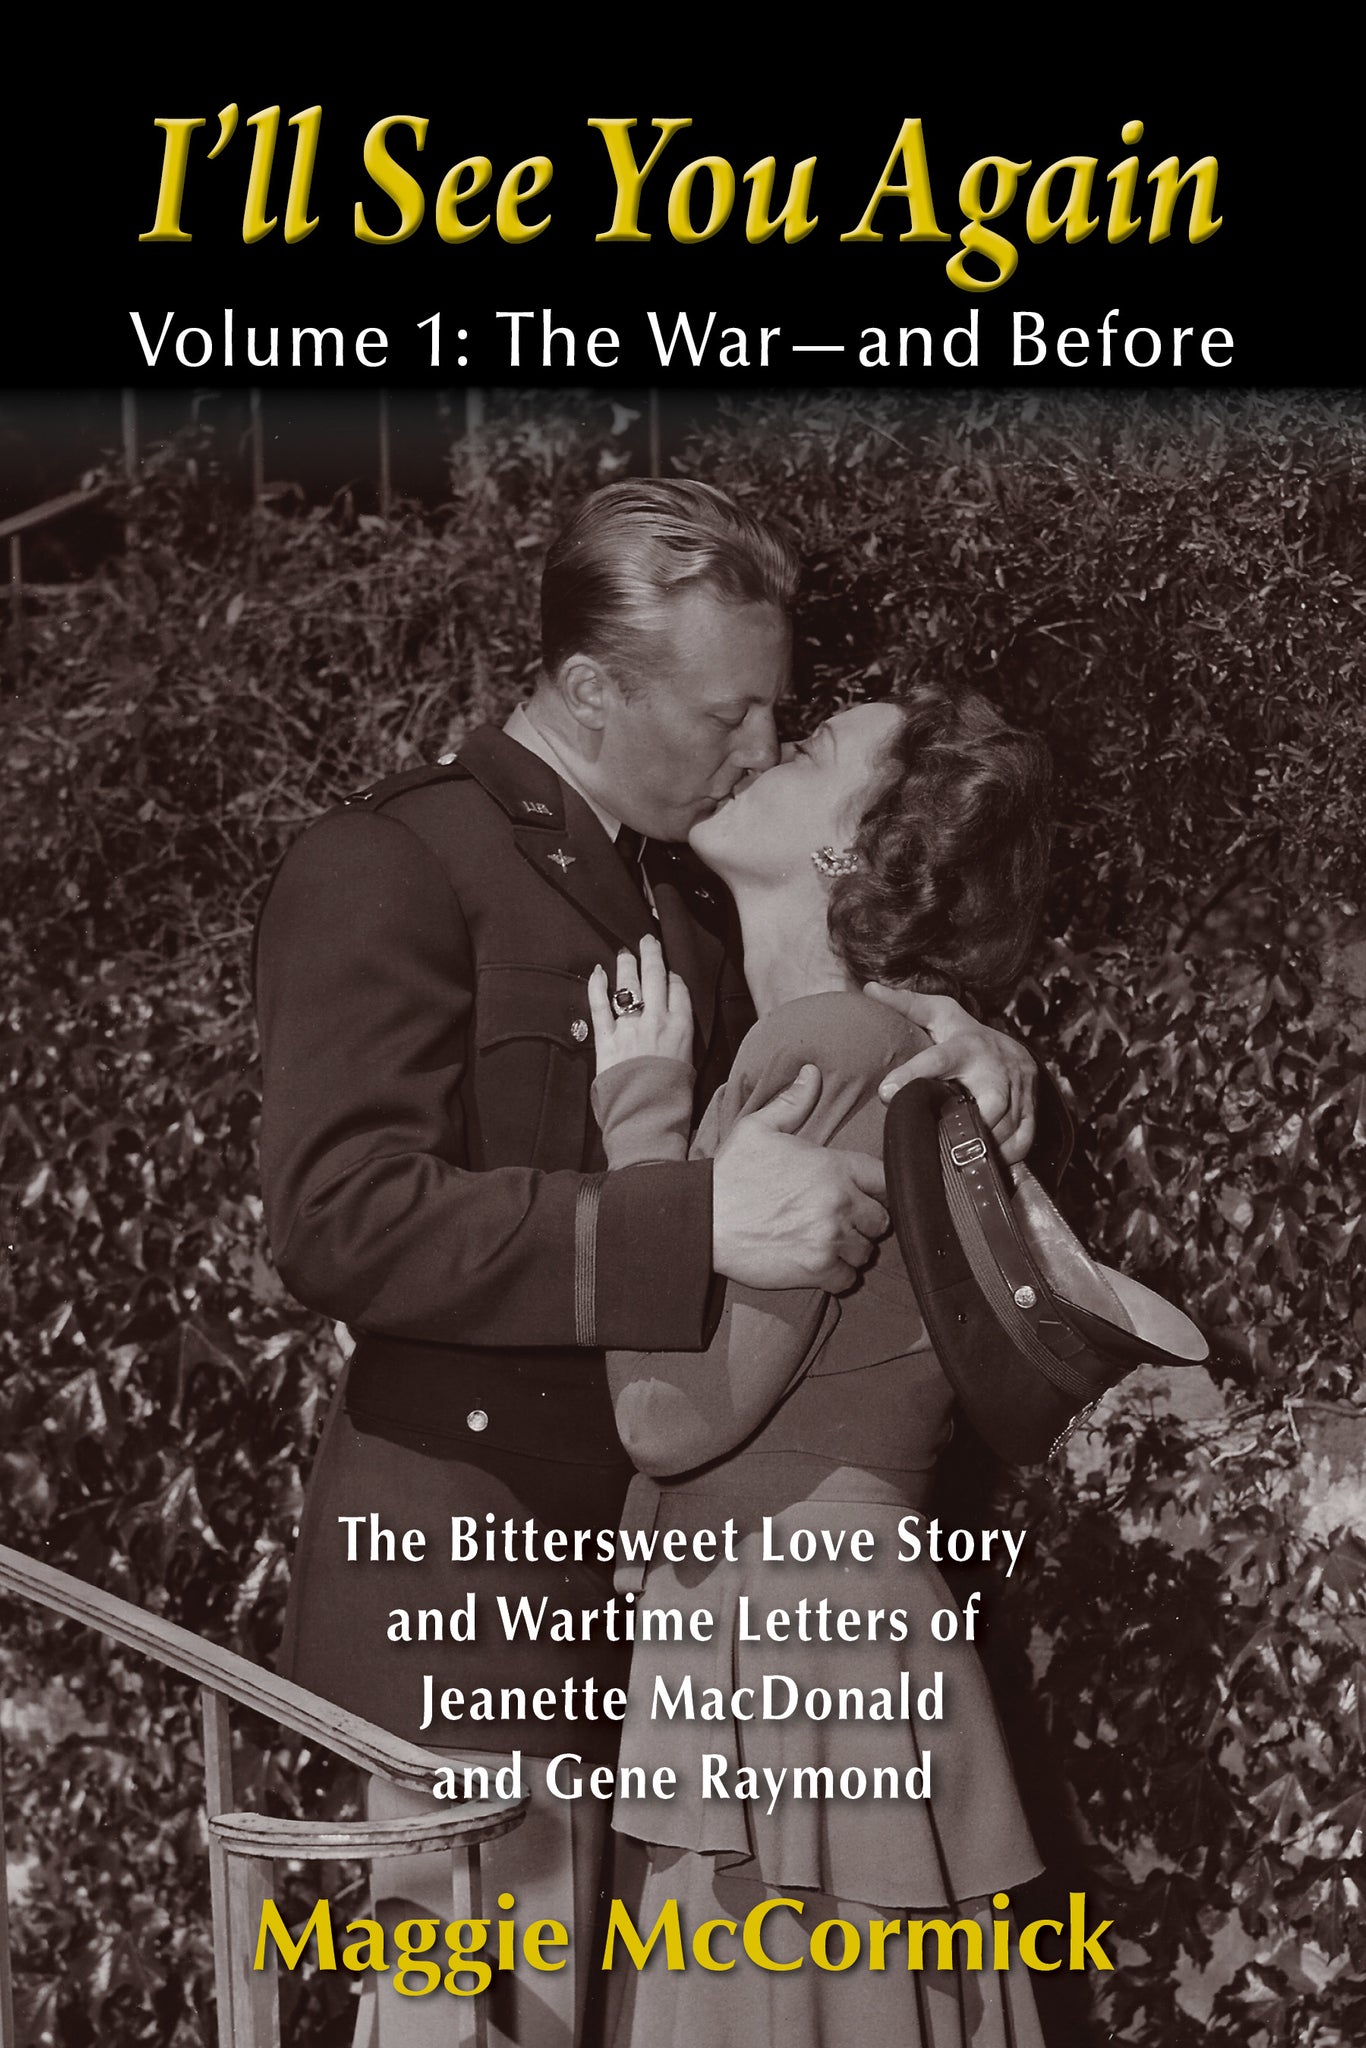 I'LL SEE YOU AGAIN: THE BITTERSWEET LOVE STORY AND WARTIME LETTERS OF JEANETTE MACDONALD AND GENE RAYMOND, VOL. 1 (SOFTCOVER EDITION) by Maggie McCormick - BearManor Manor